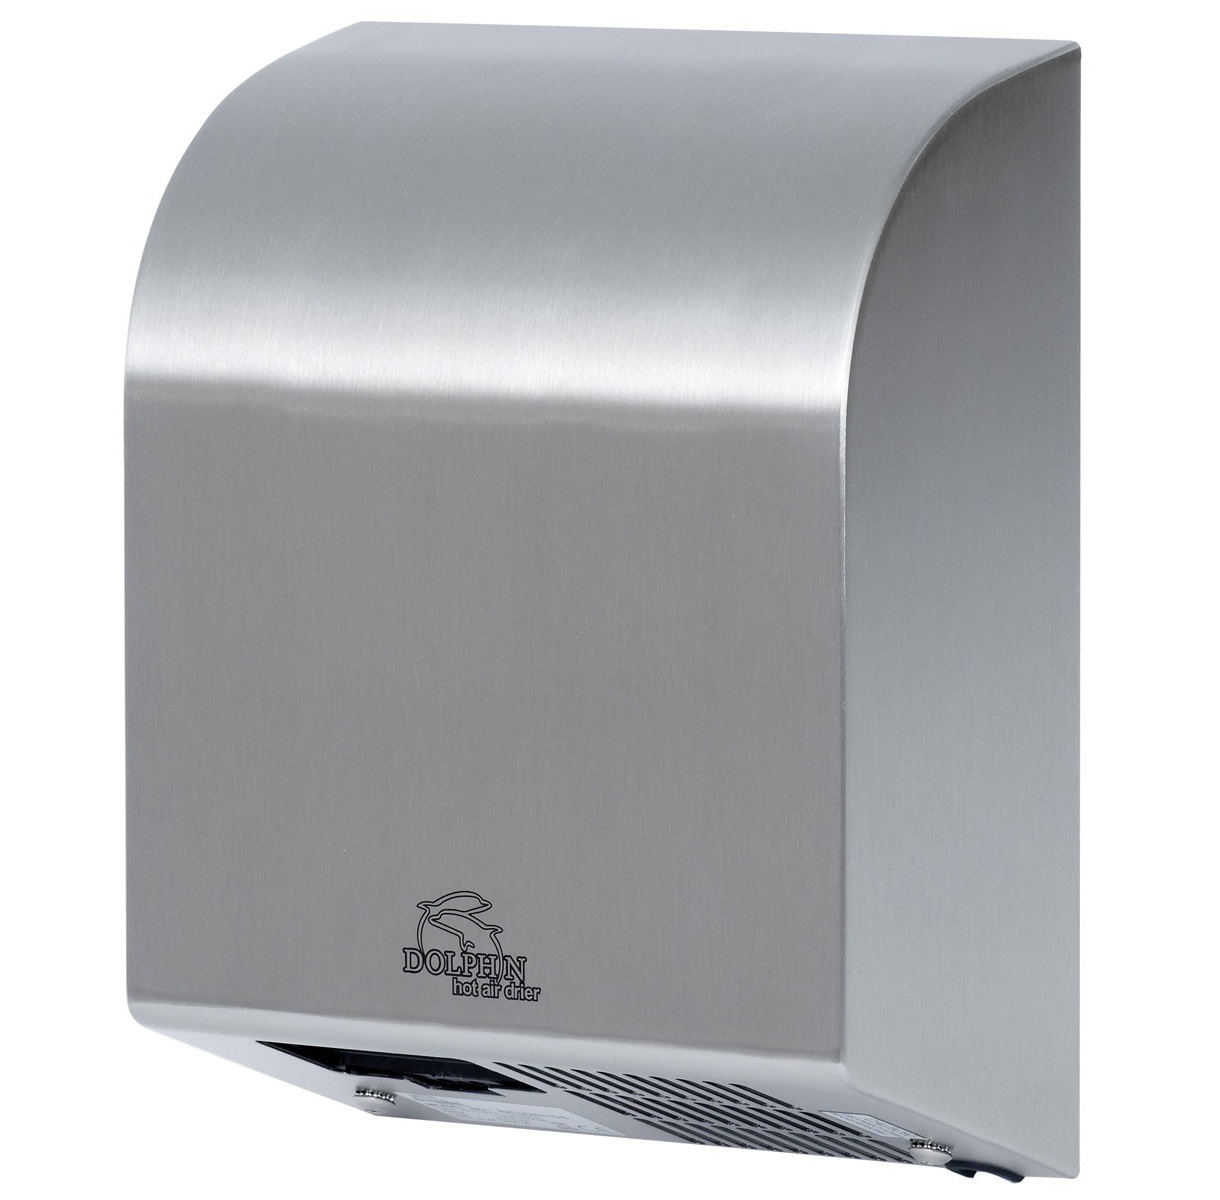 Hot Air Hand Dryer - Stainless Steel H326 x W257 x D120mm